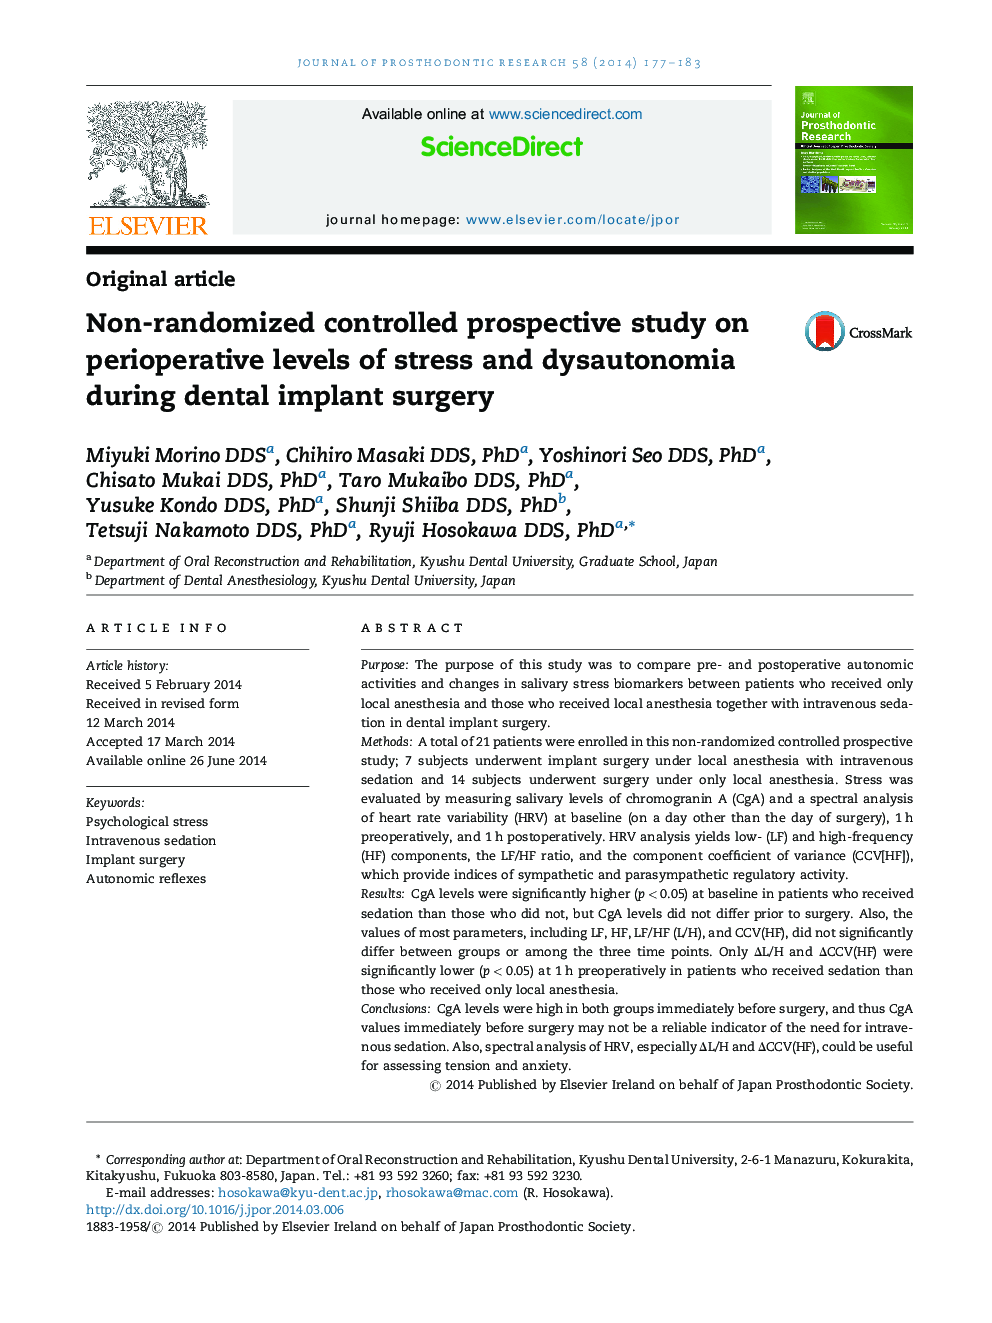 Non-randomized controlled prospective study on perioperative levels of stress and dysautonomia during dental implant surgery